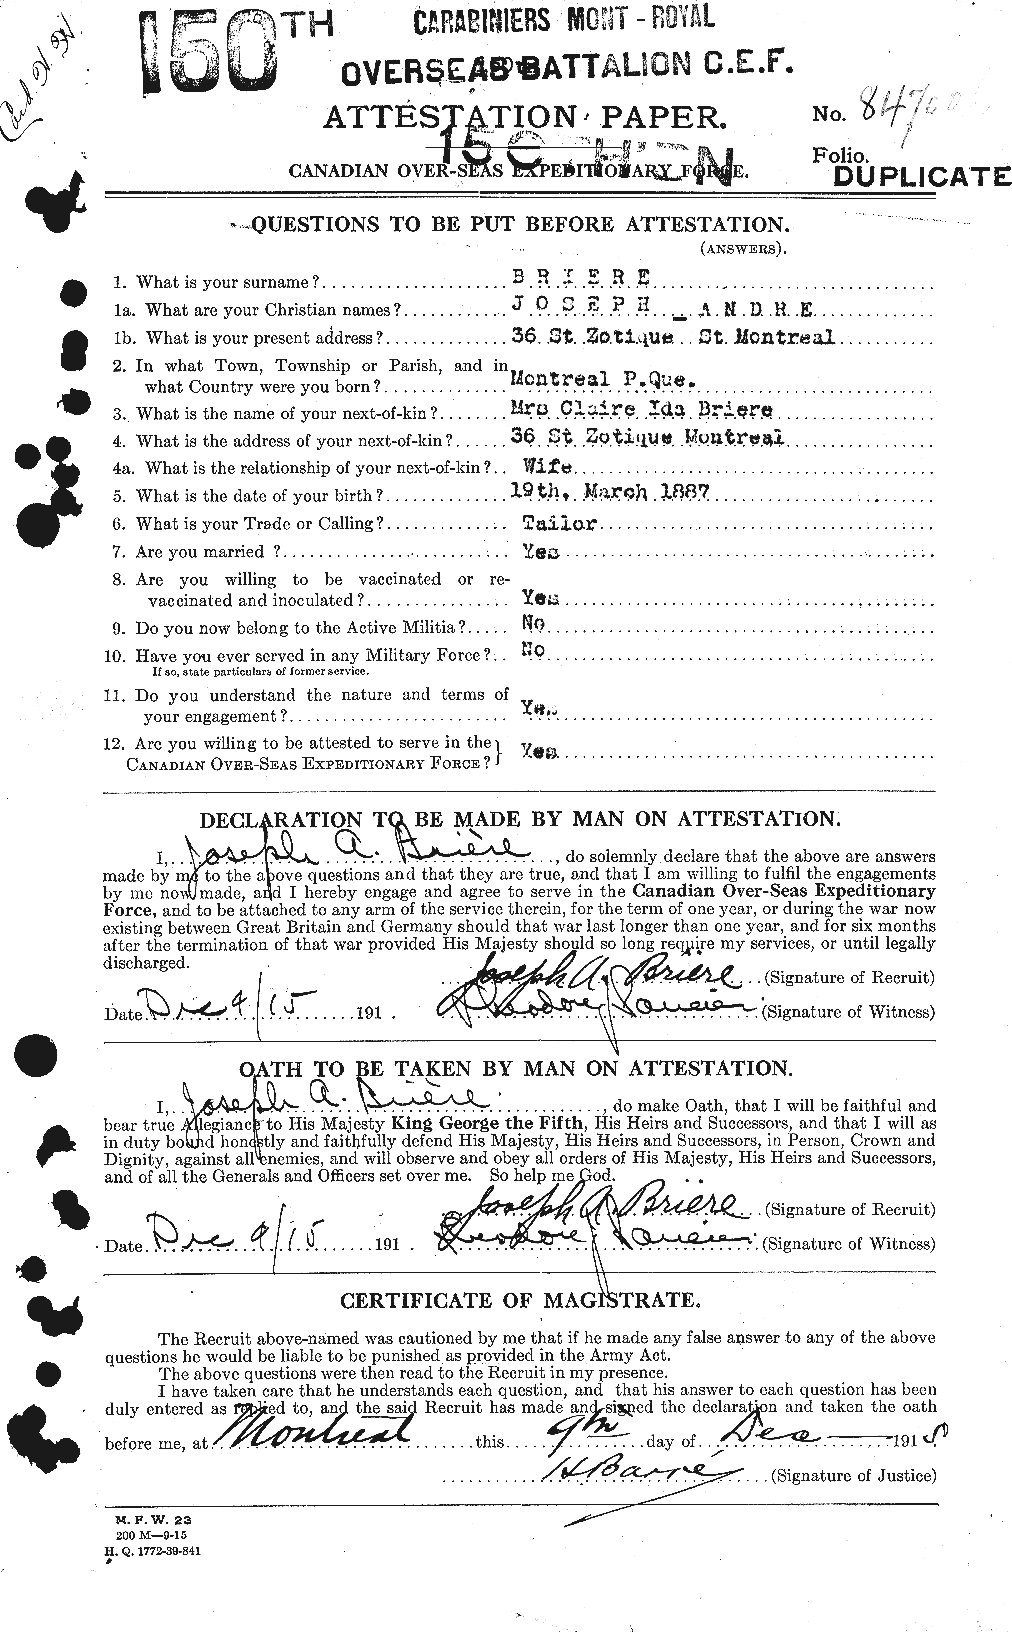 Personnel Records of the First World War - CEF 259980a